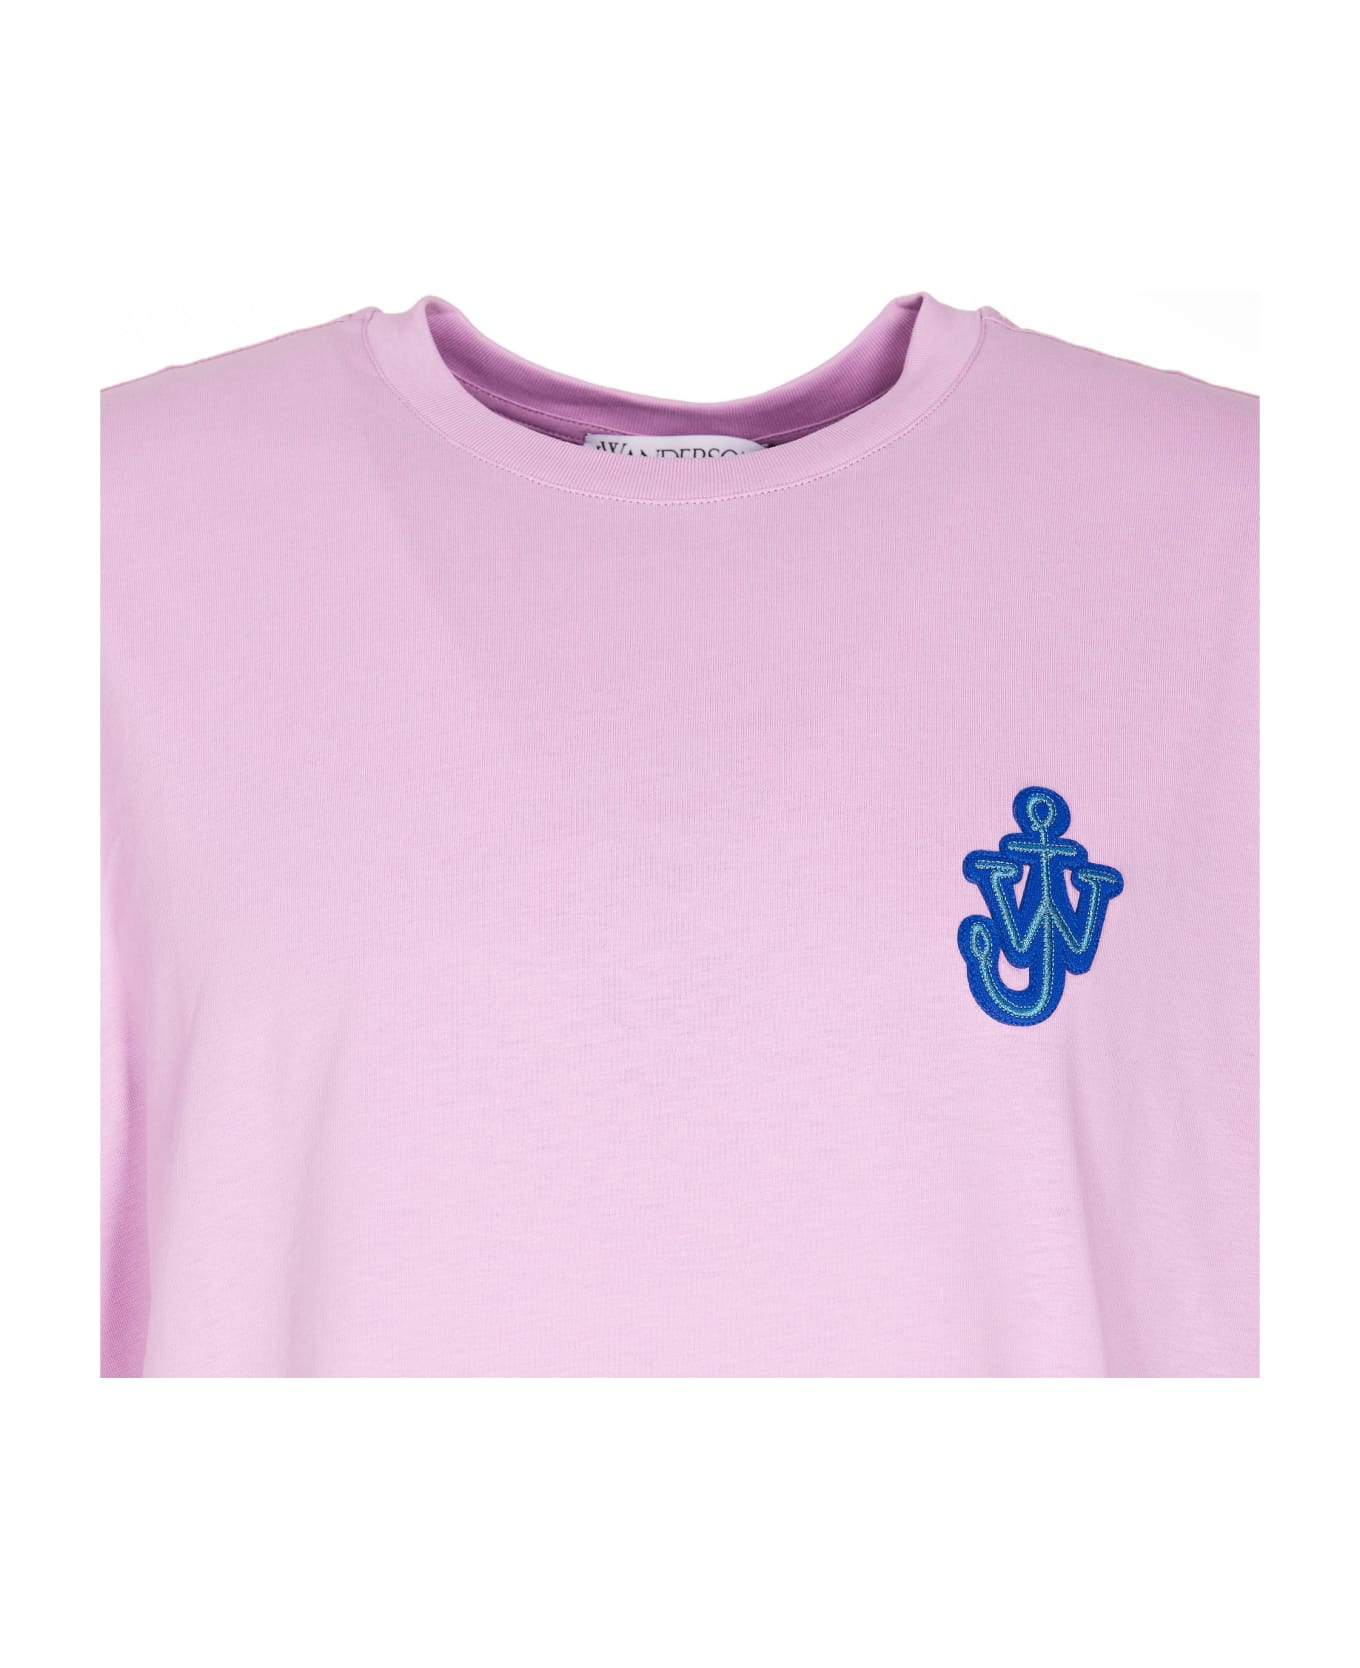 J.W. Anderson Anchor Patch T-shirt - Pink